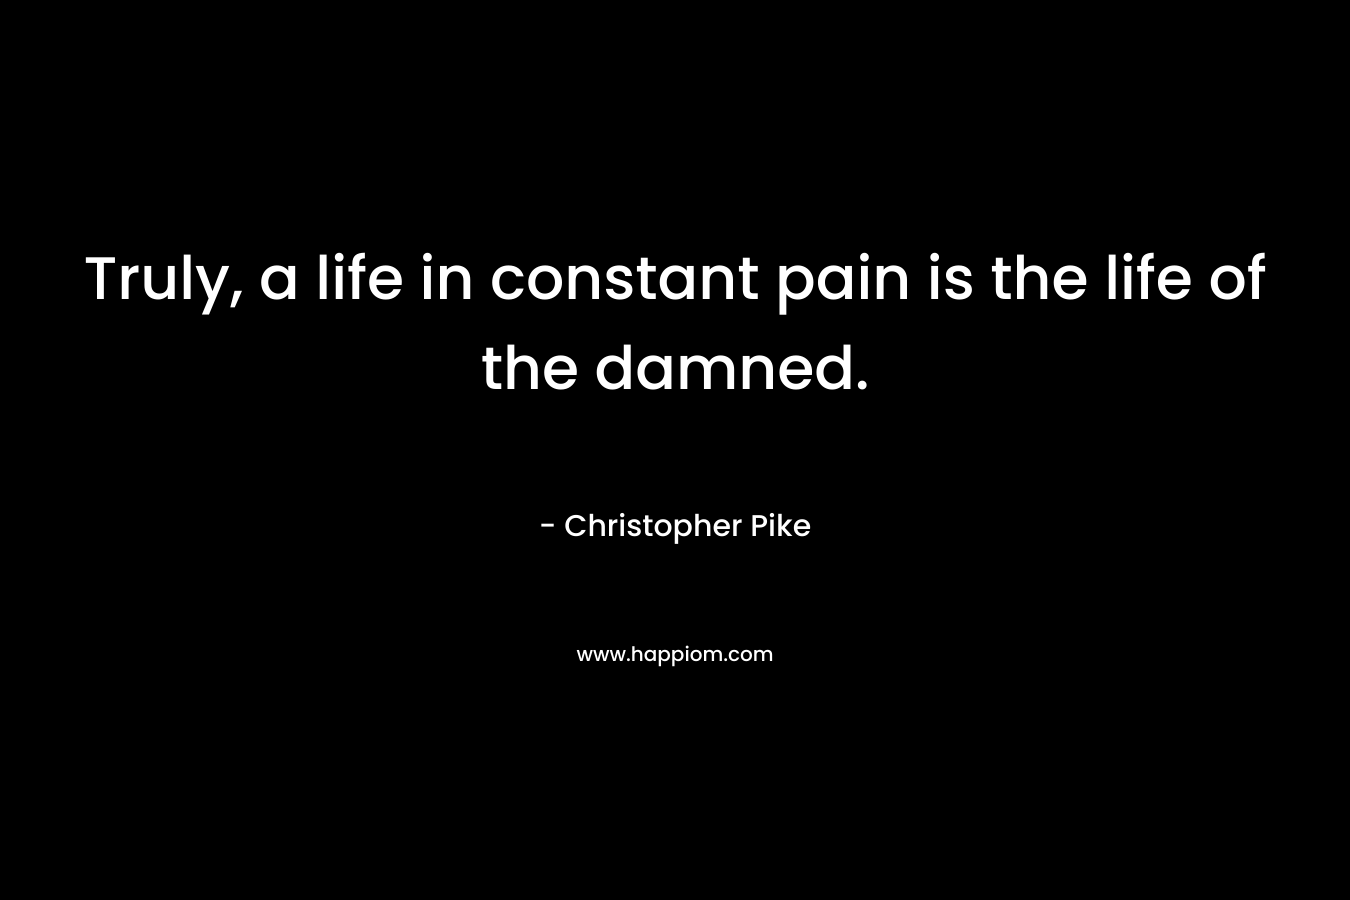 Truly, a life in constant pain is the life of the damned.